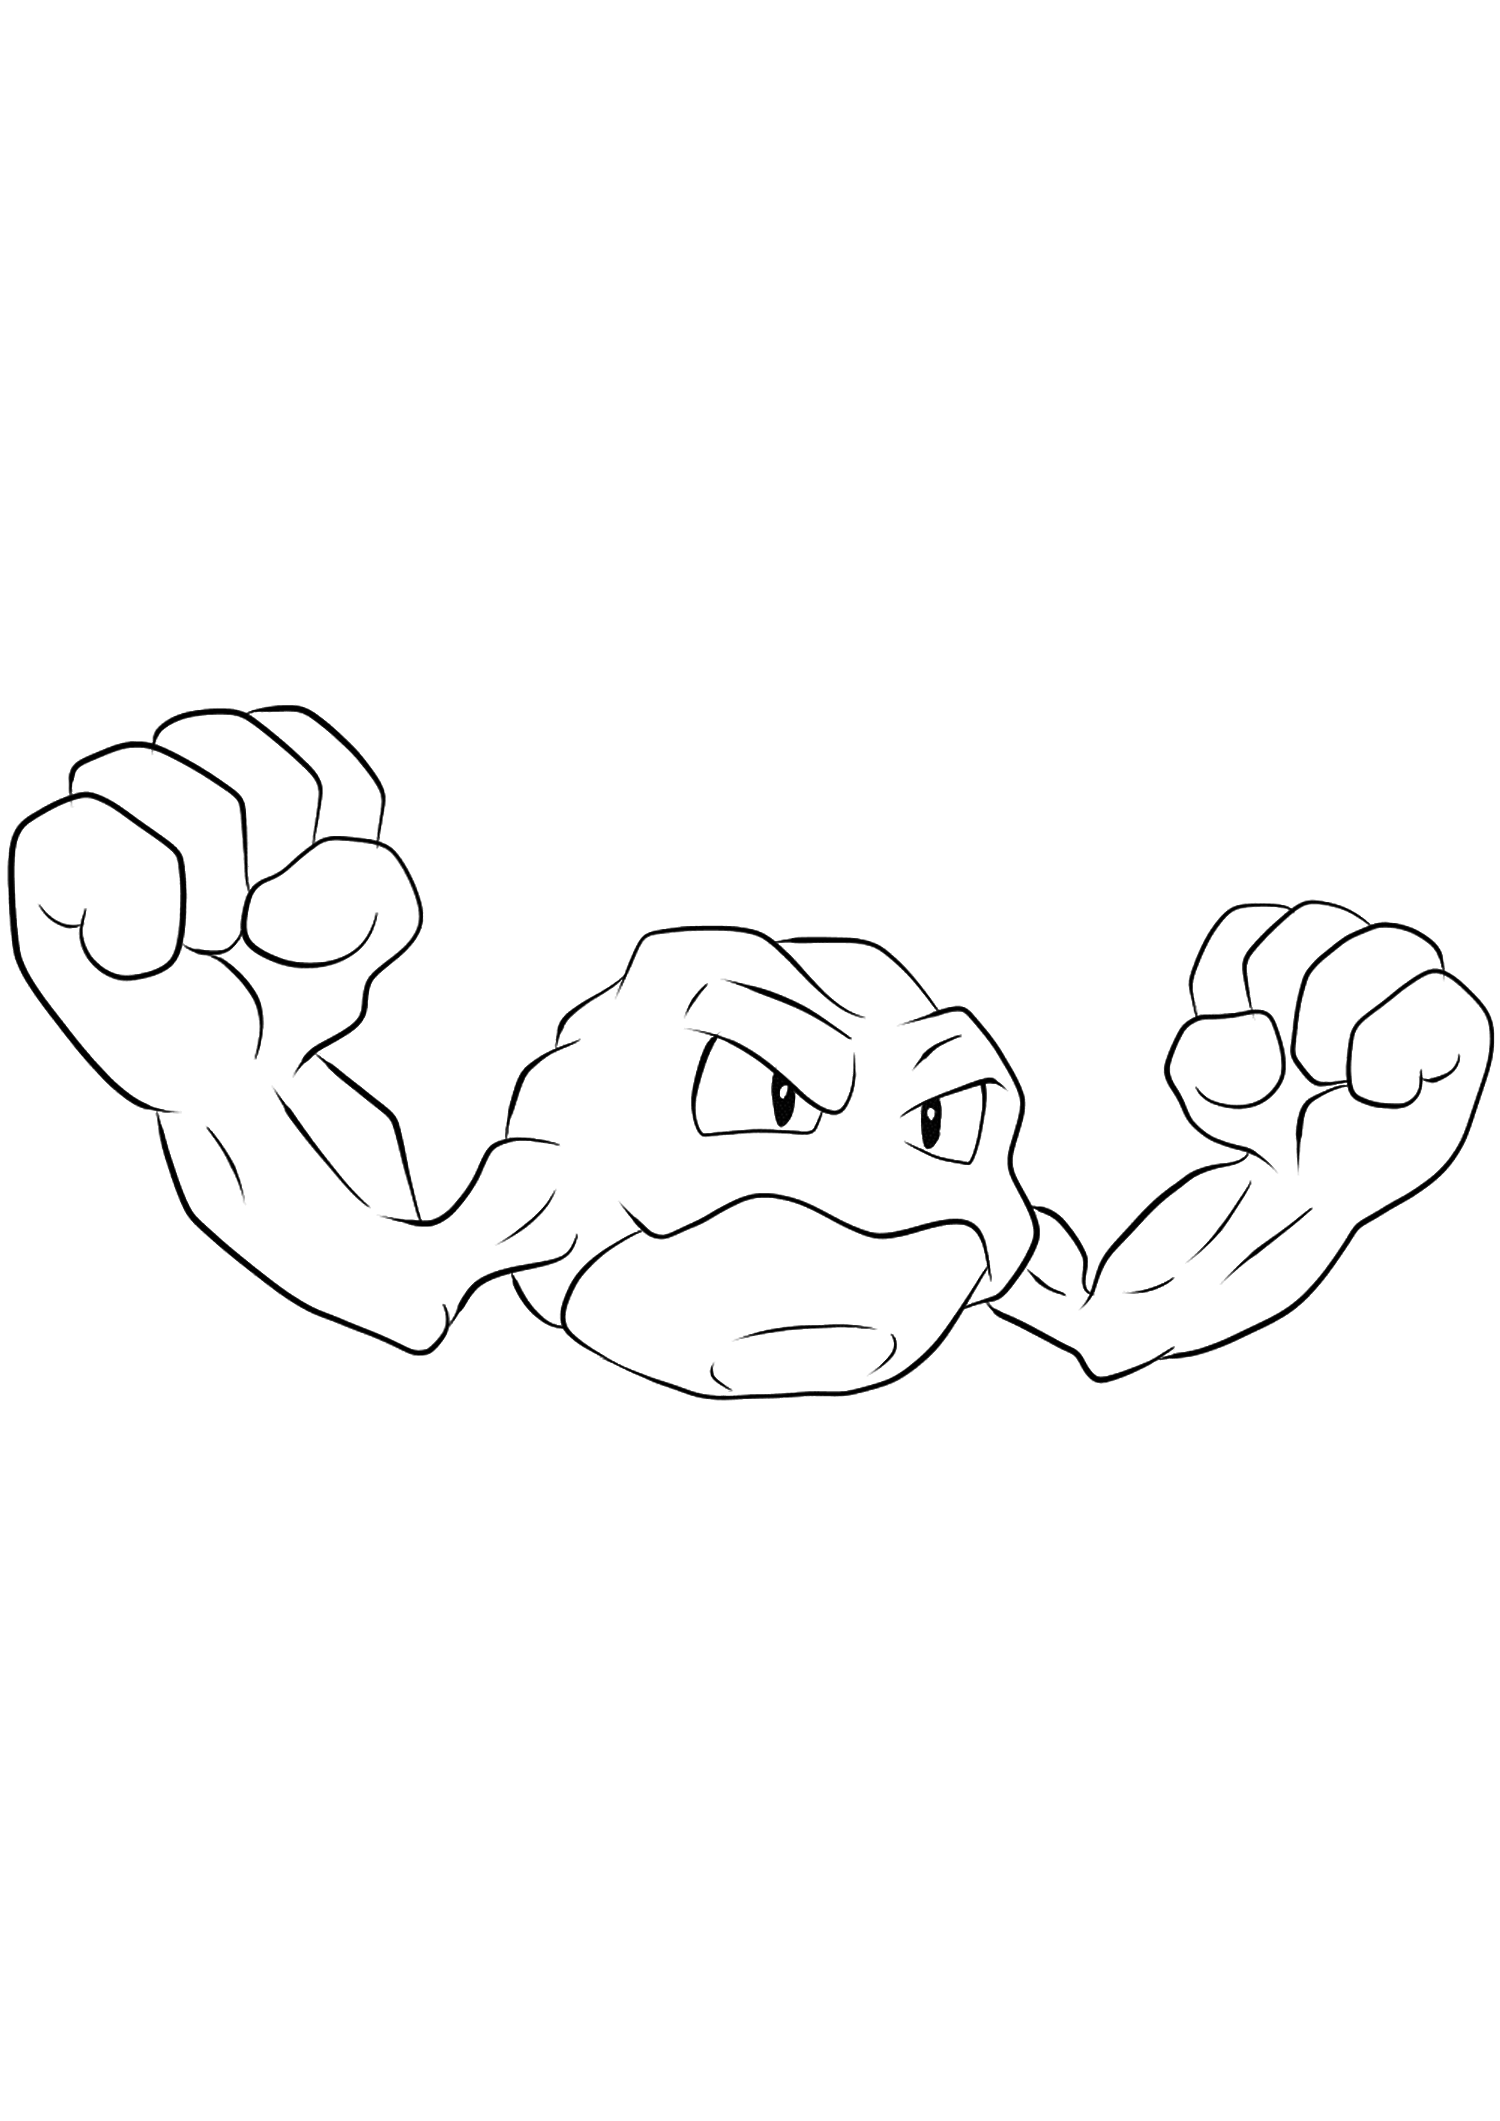 Geodude (No.74). Geodude Coloring page, Generation I Pokemon of type Rock and ElectrikOriginal image credit: Pokemon linearts by Lilly Gerbil on Deviantart.Permission:  All rights reserved © Pokemon company and Ken Sugimori.